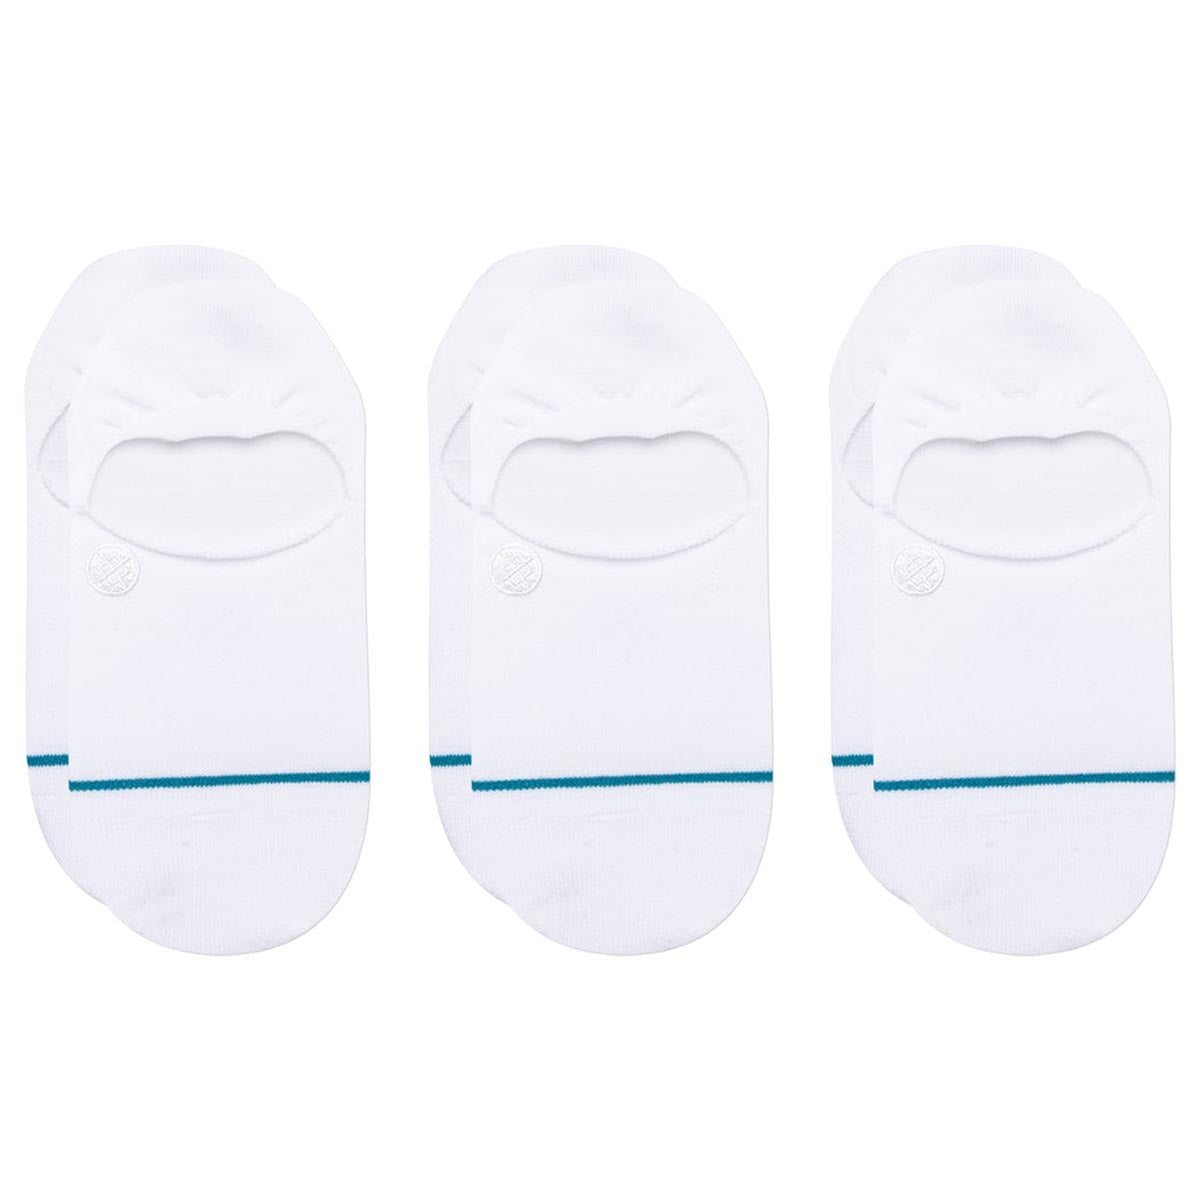 Stance Icon No Show 3 Pack Socks - White image 1